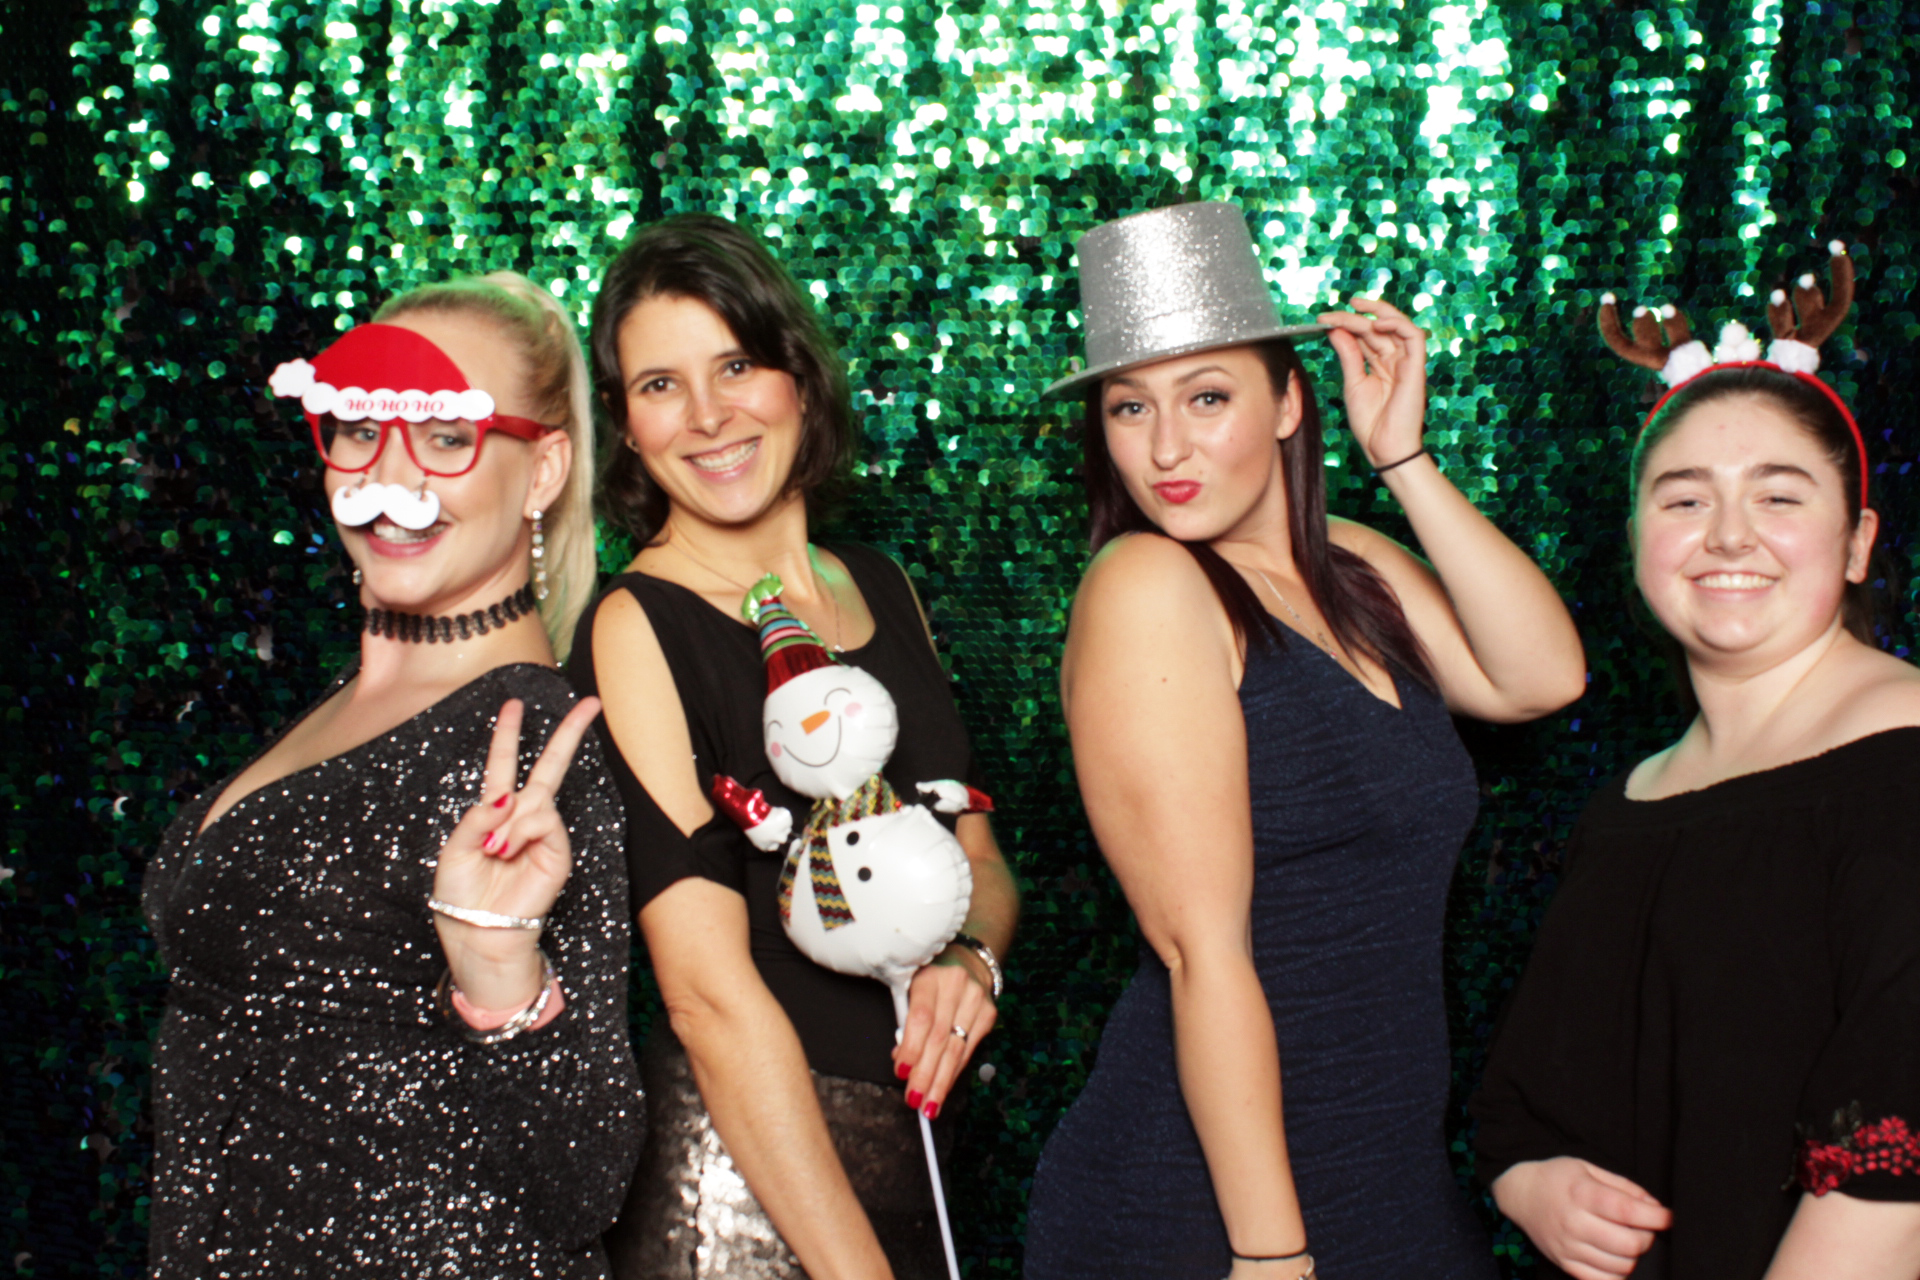 Women posing with holiday props in front of a green sequin backdrop.